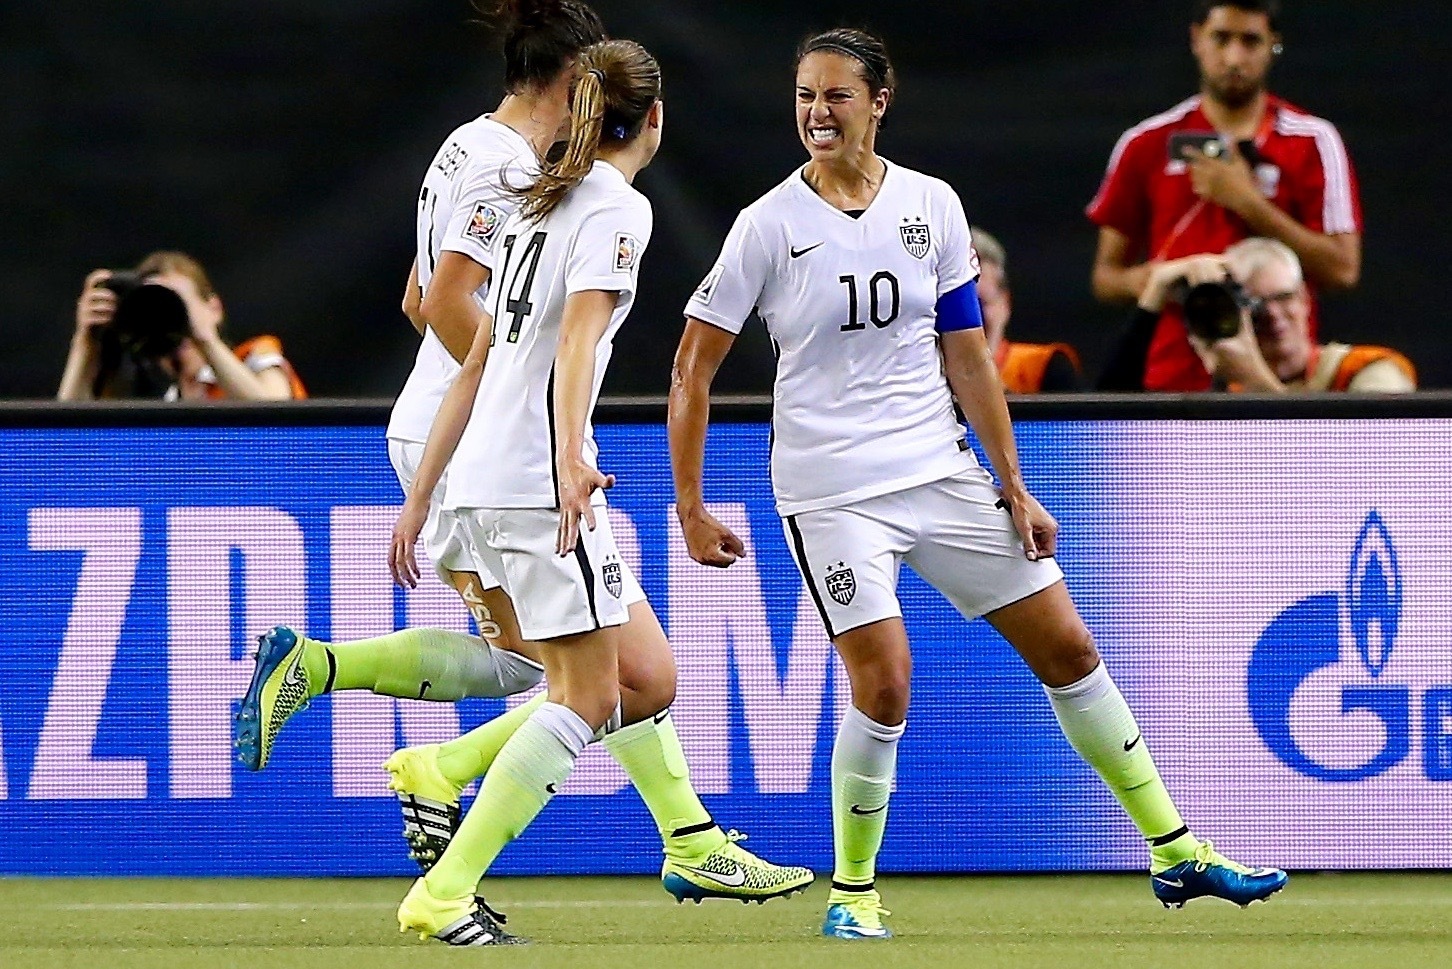 USA vs. Germany: Live Score, Highlights from Women's World Cup